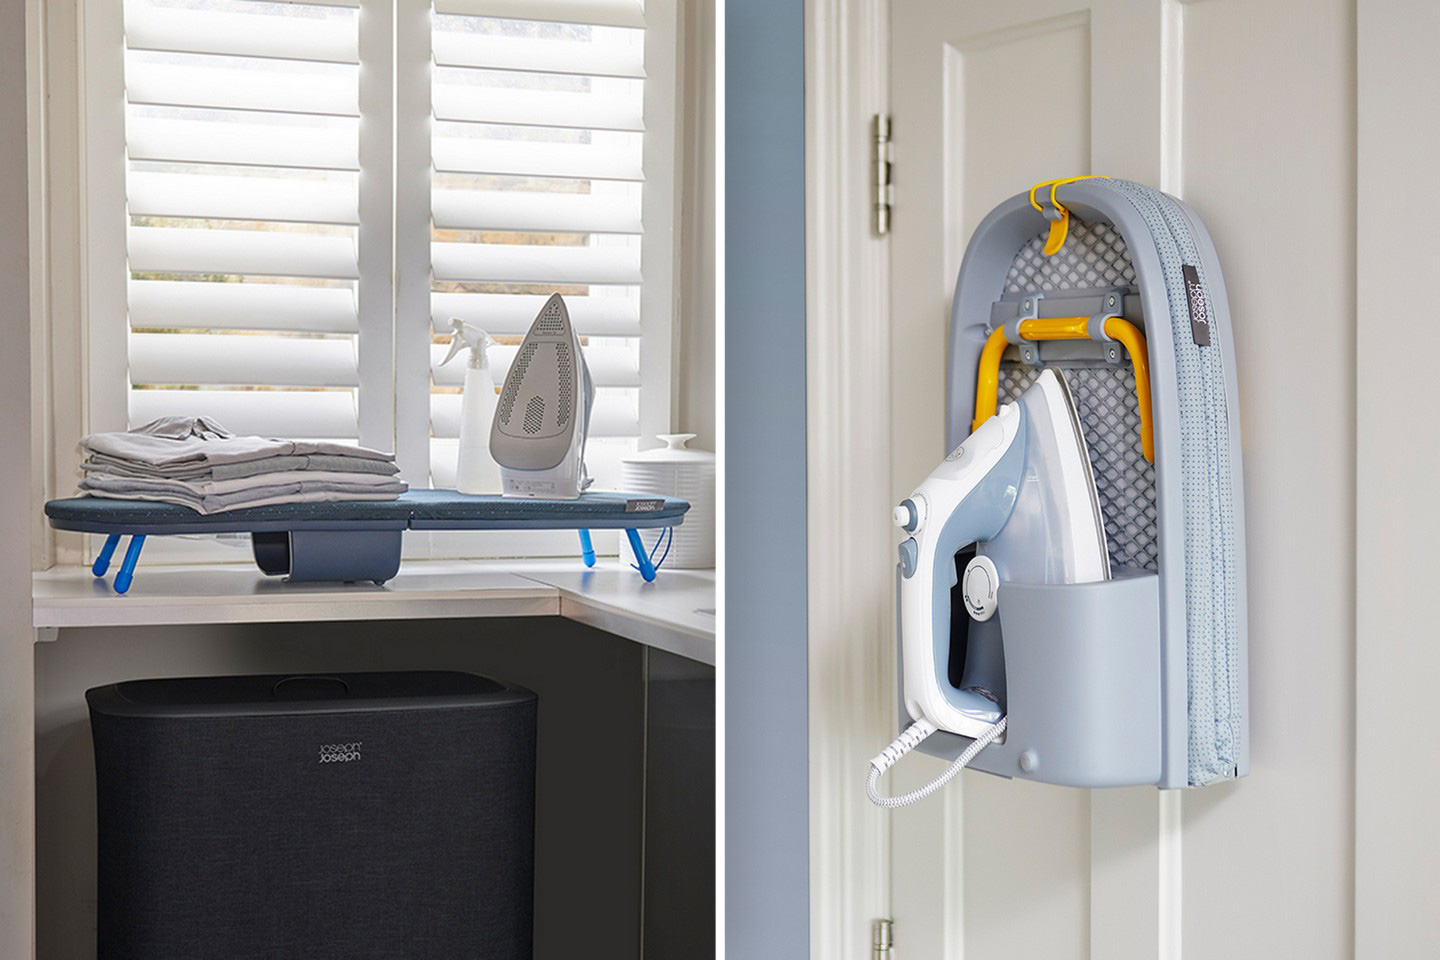 #Check out this nifty folding ironing table that mounts on the wall and lets you dock your iron